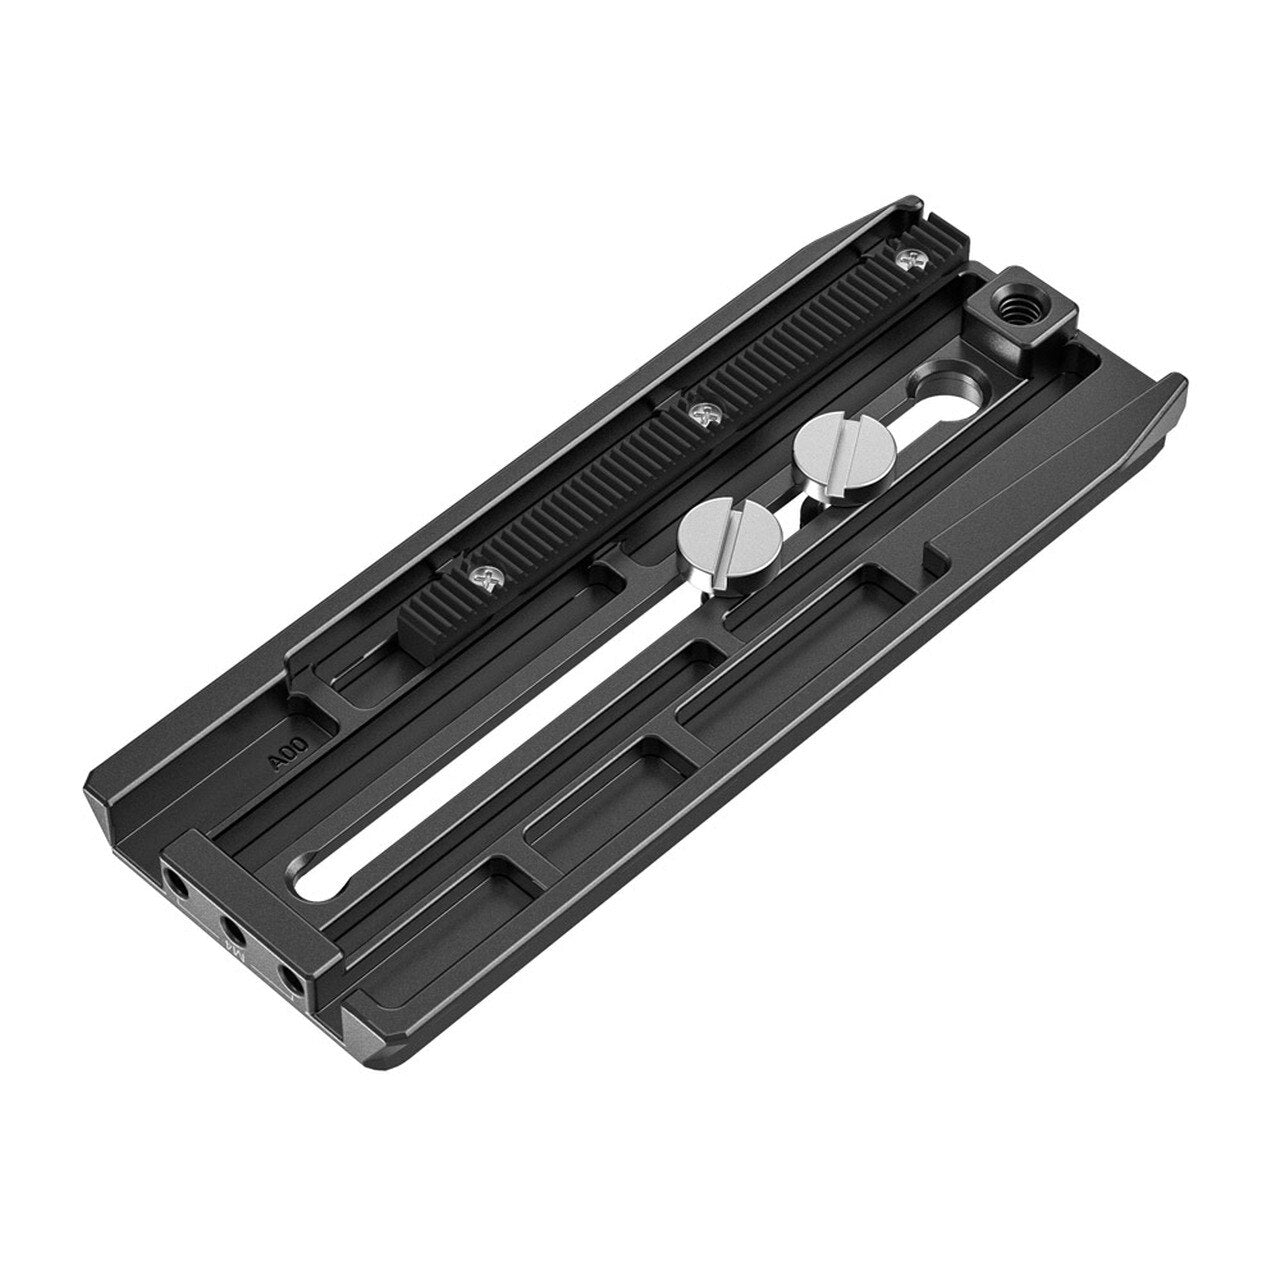 SMALLRIG Manfrotto Quick Release Plate for DJI RS 2/RSC 2/Ronin-S Gimbal 3158 (DISCONTINUED)